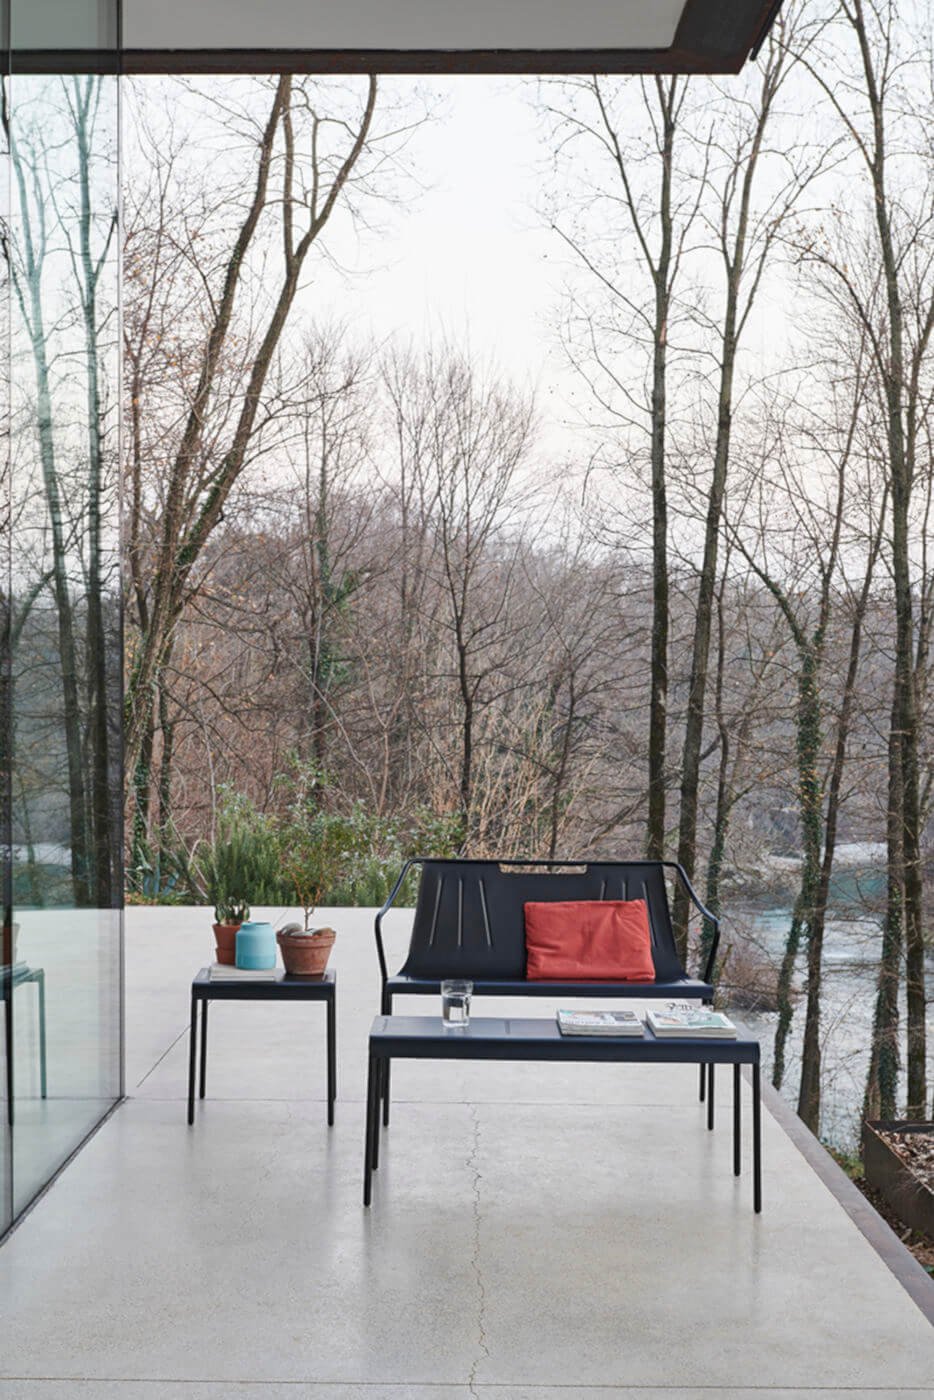 Ola BN M Bench from Midj, designed by Paolo Vernier